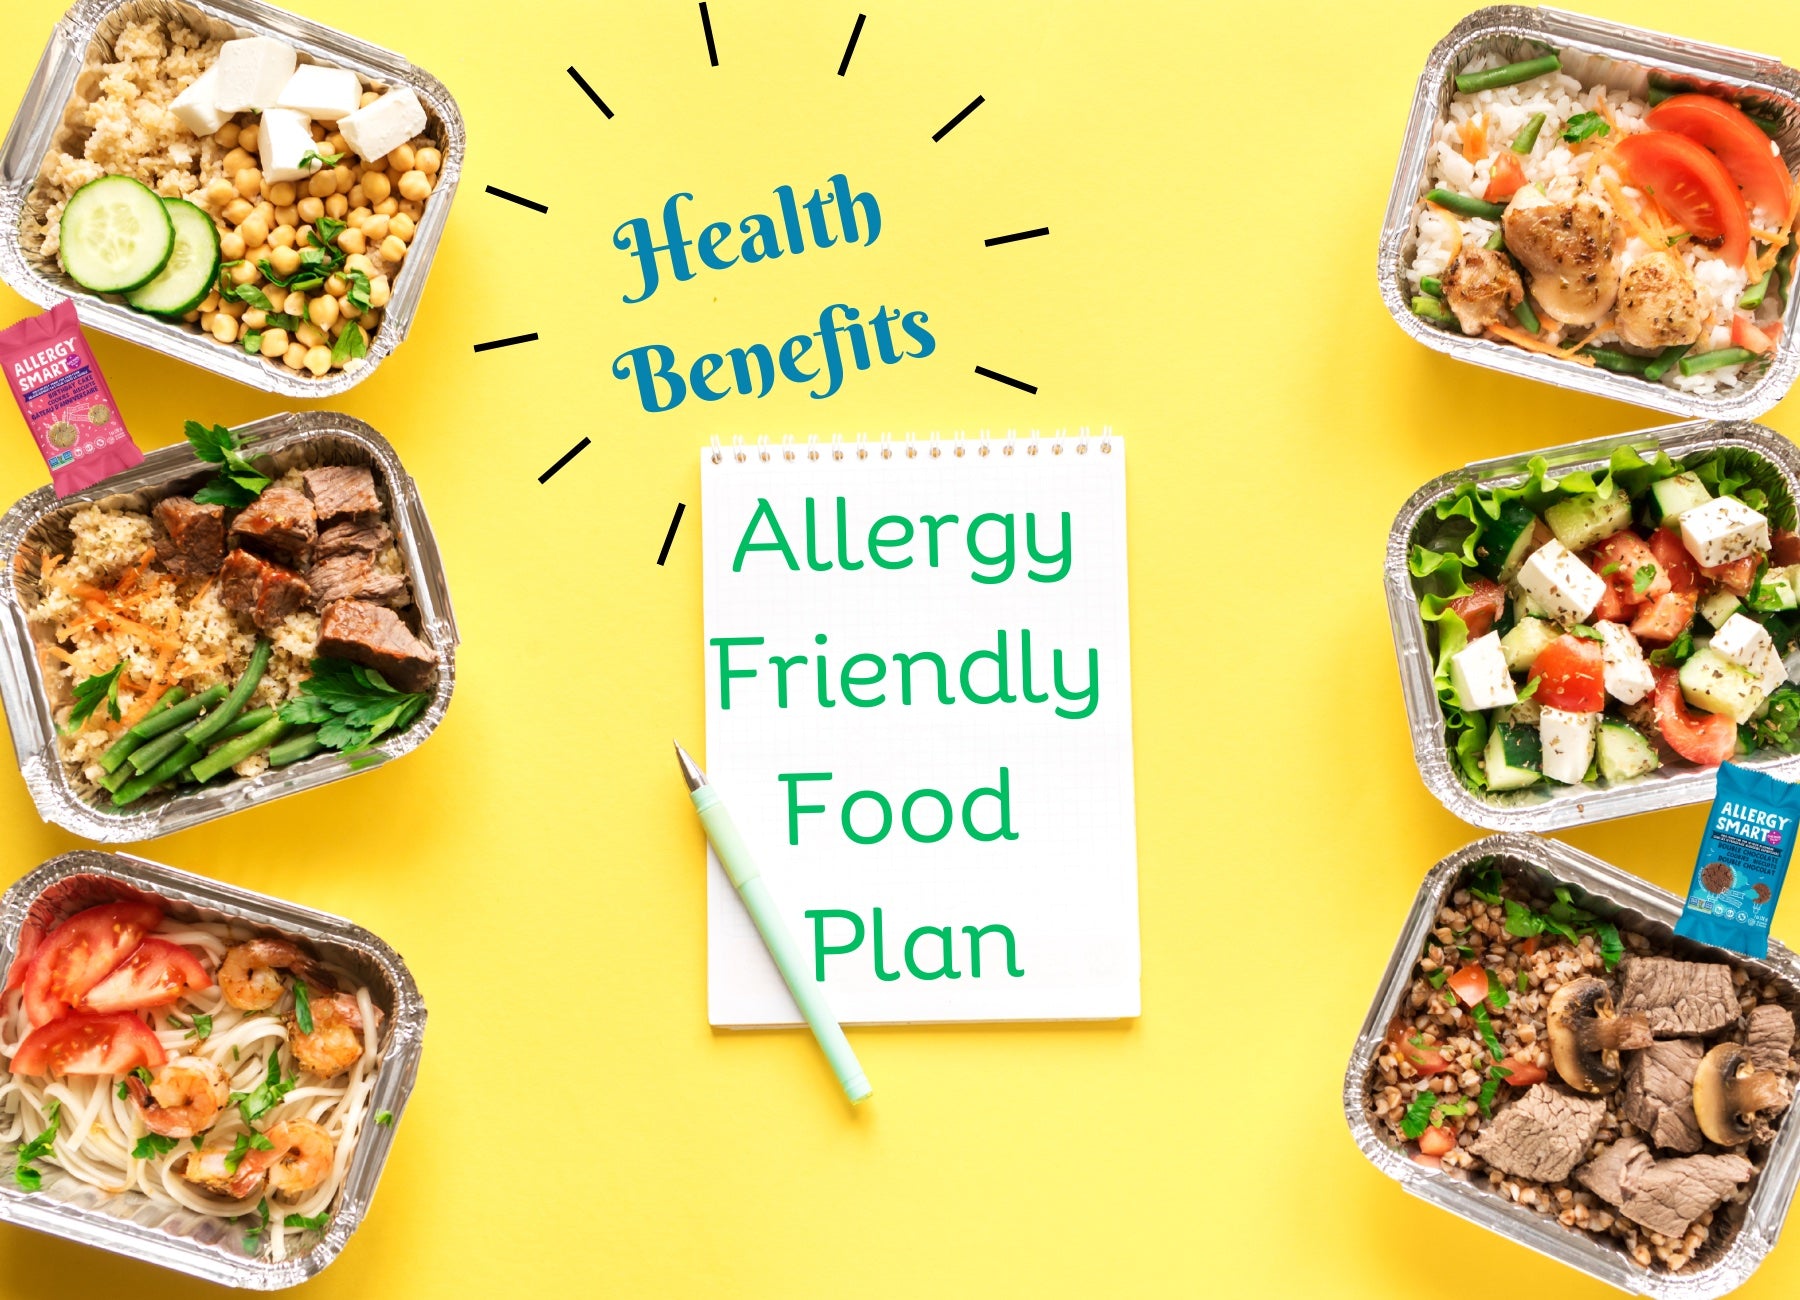 Health Benefits of an Allergy Friendly Food Plan